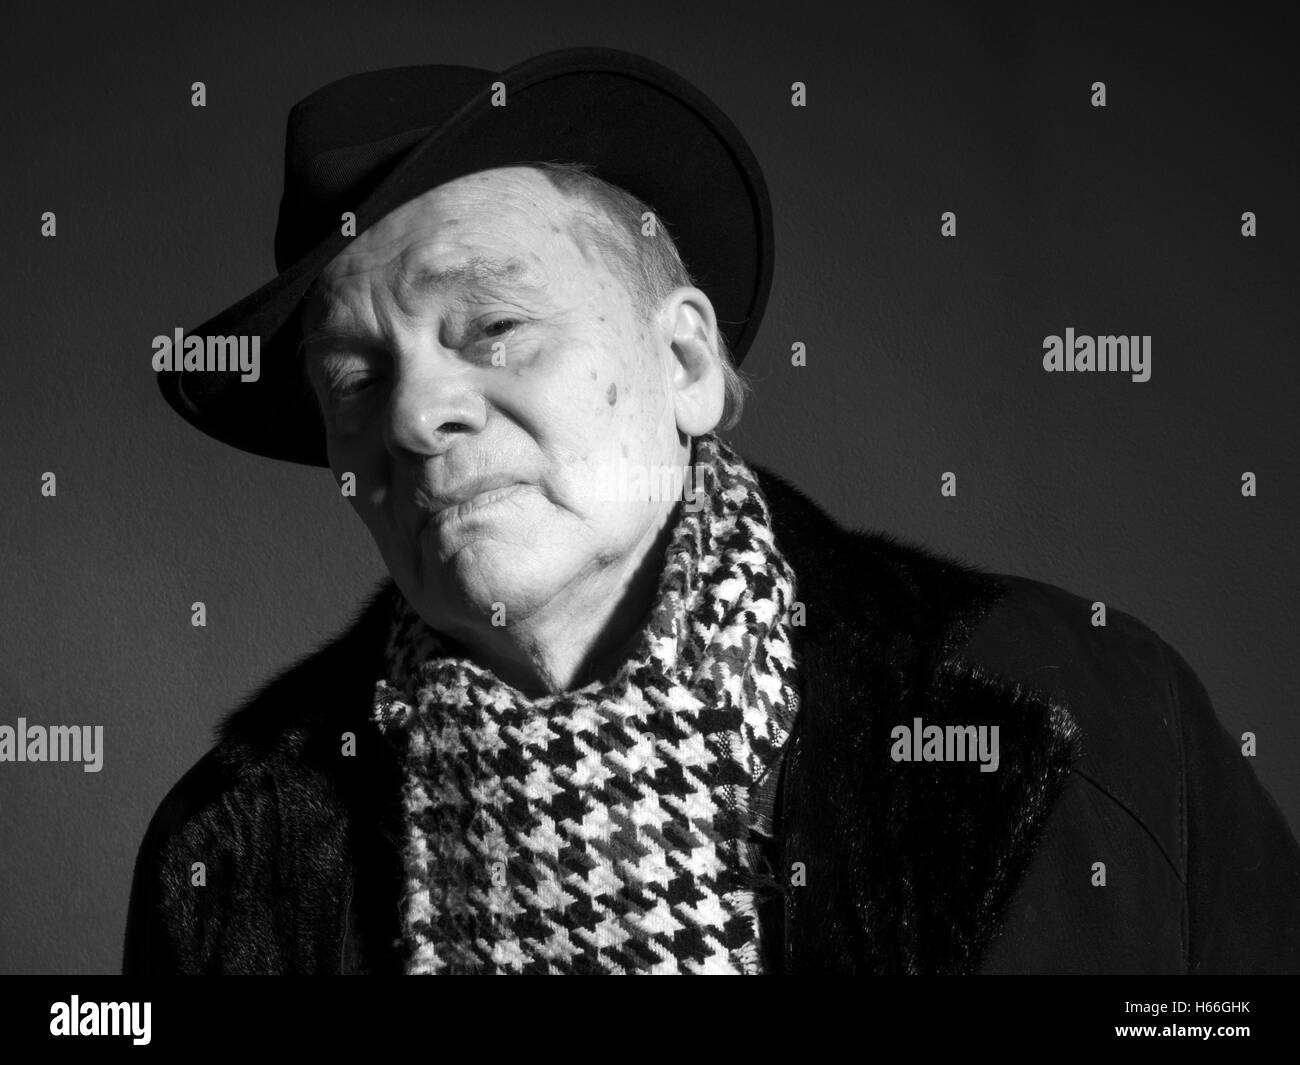 Portrait of elderly man in coat, hat and scarf on a dark background Stock Photo